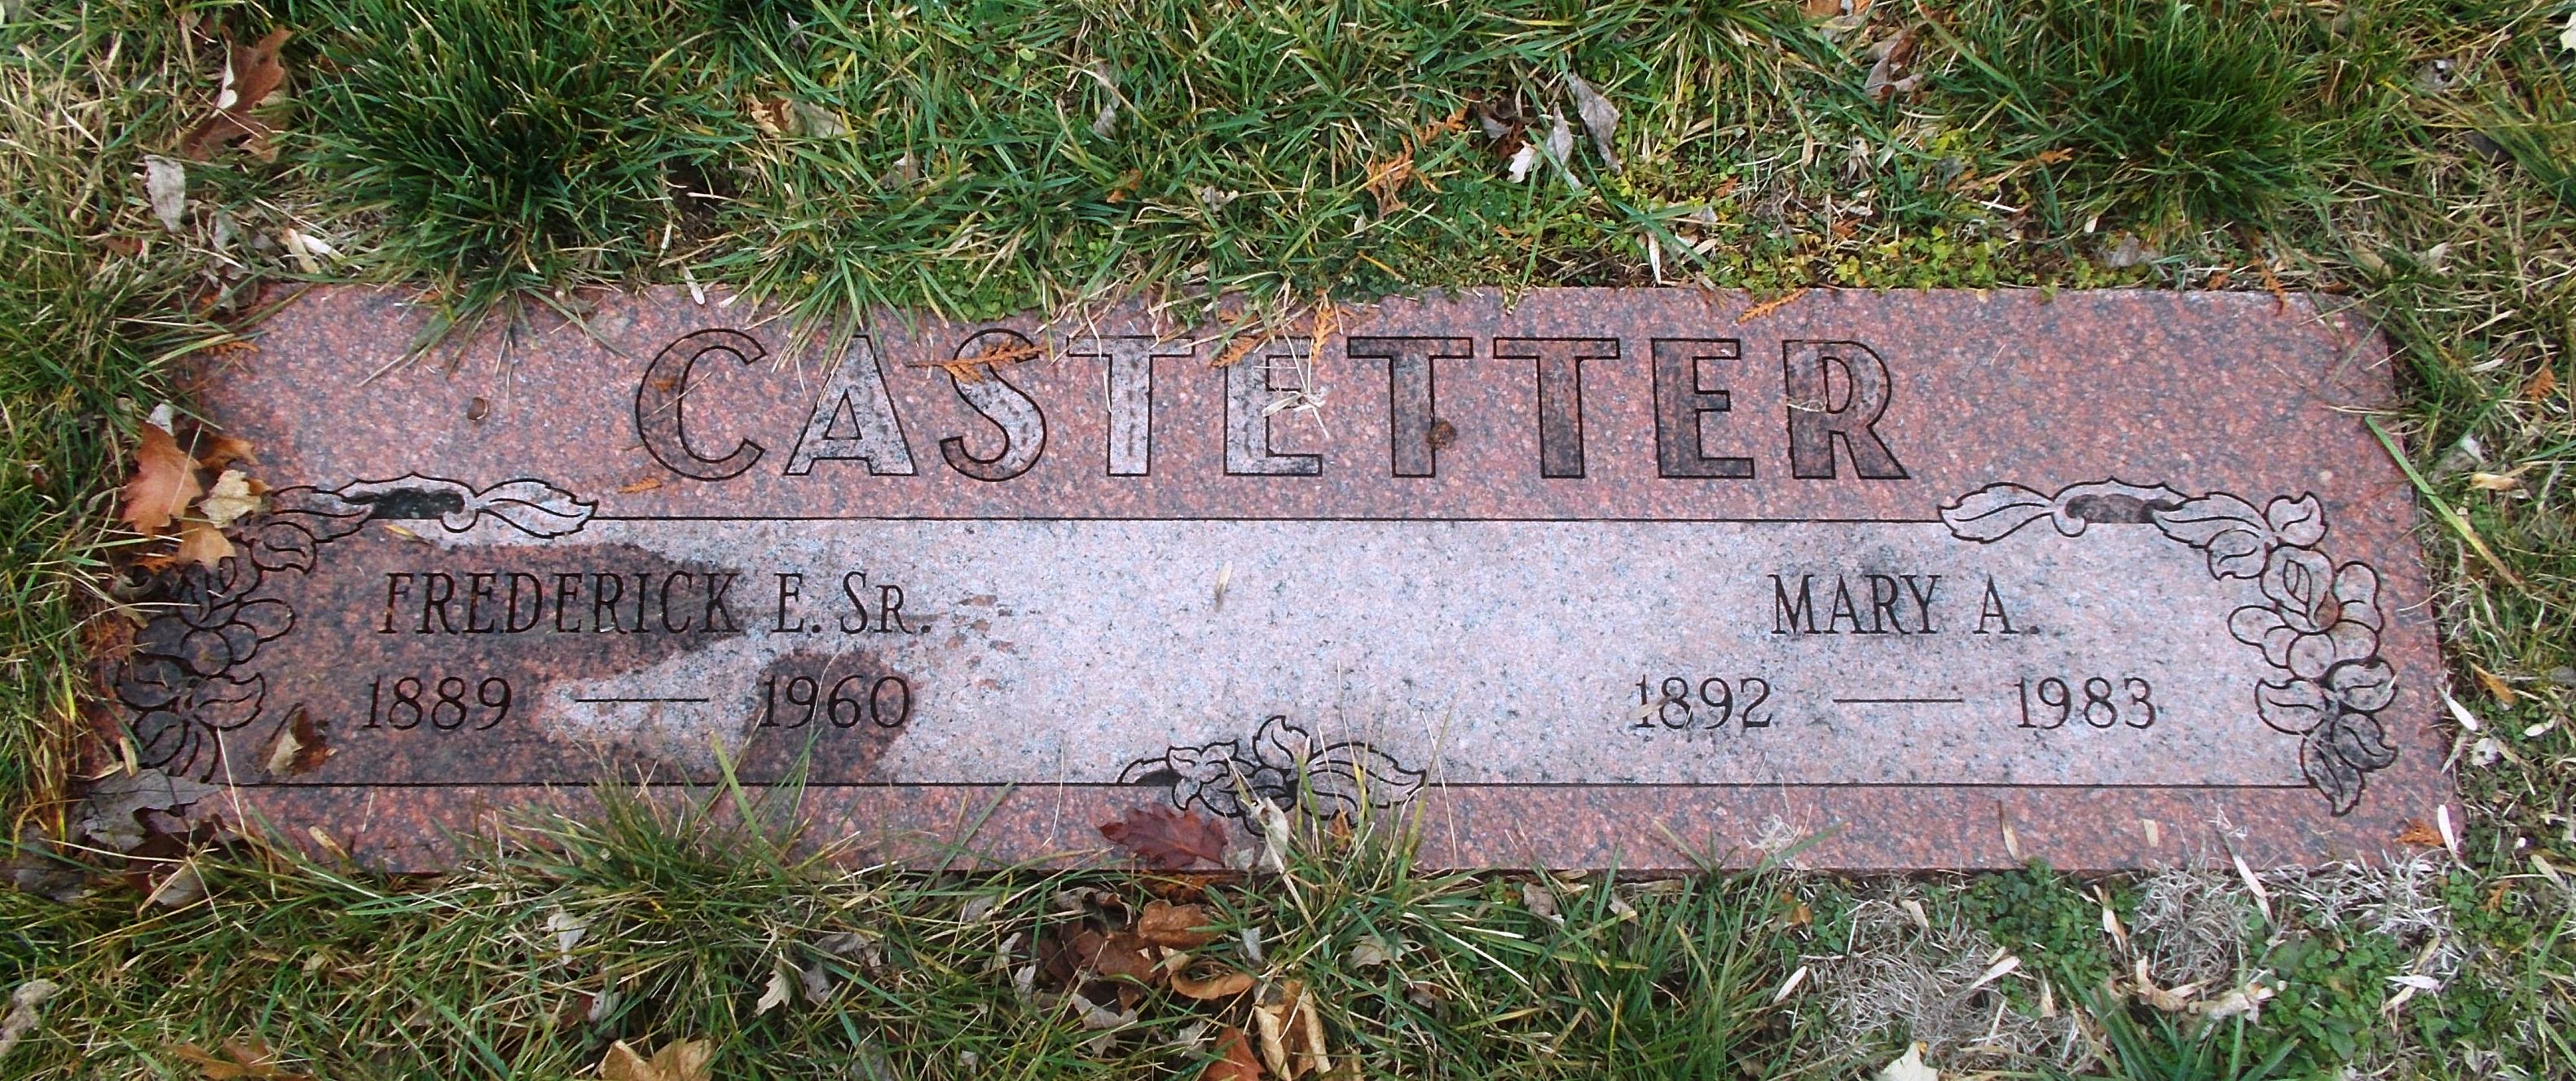 Mary A Castetter